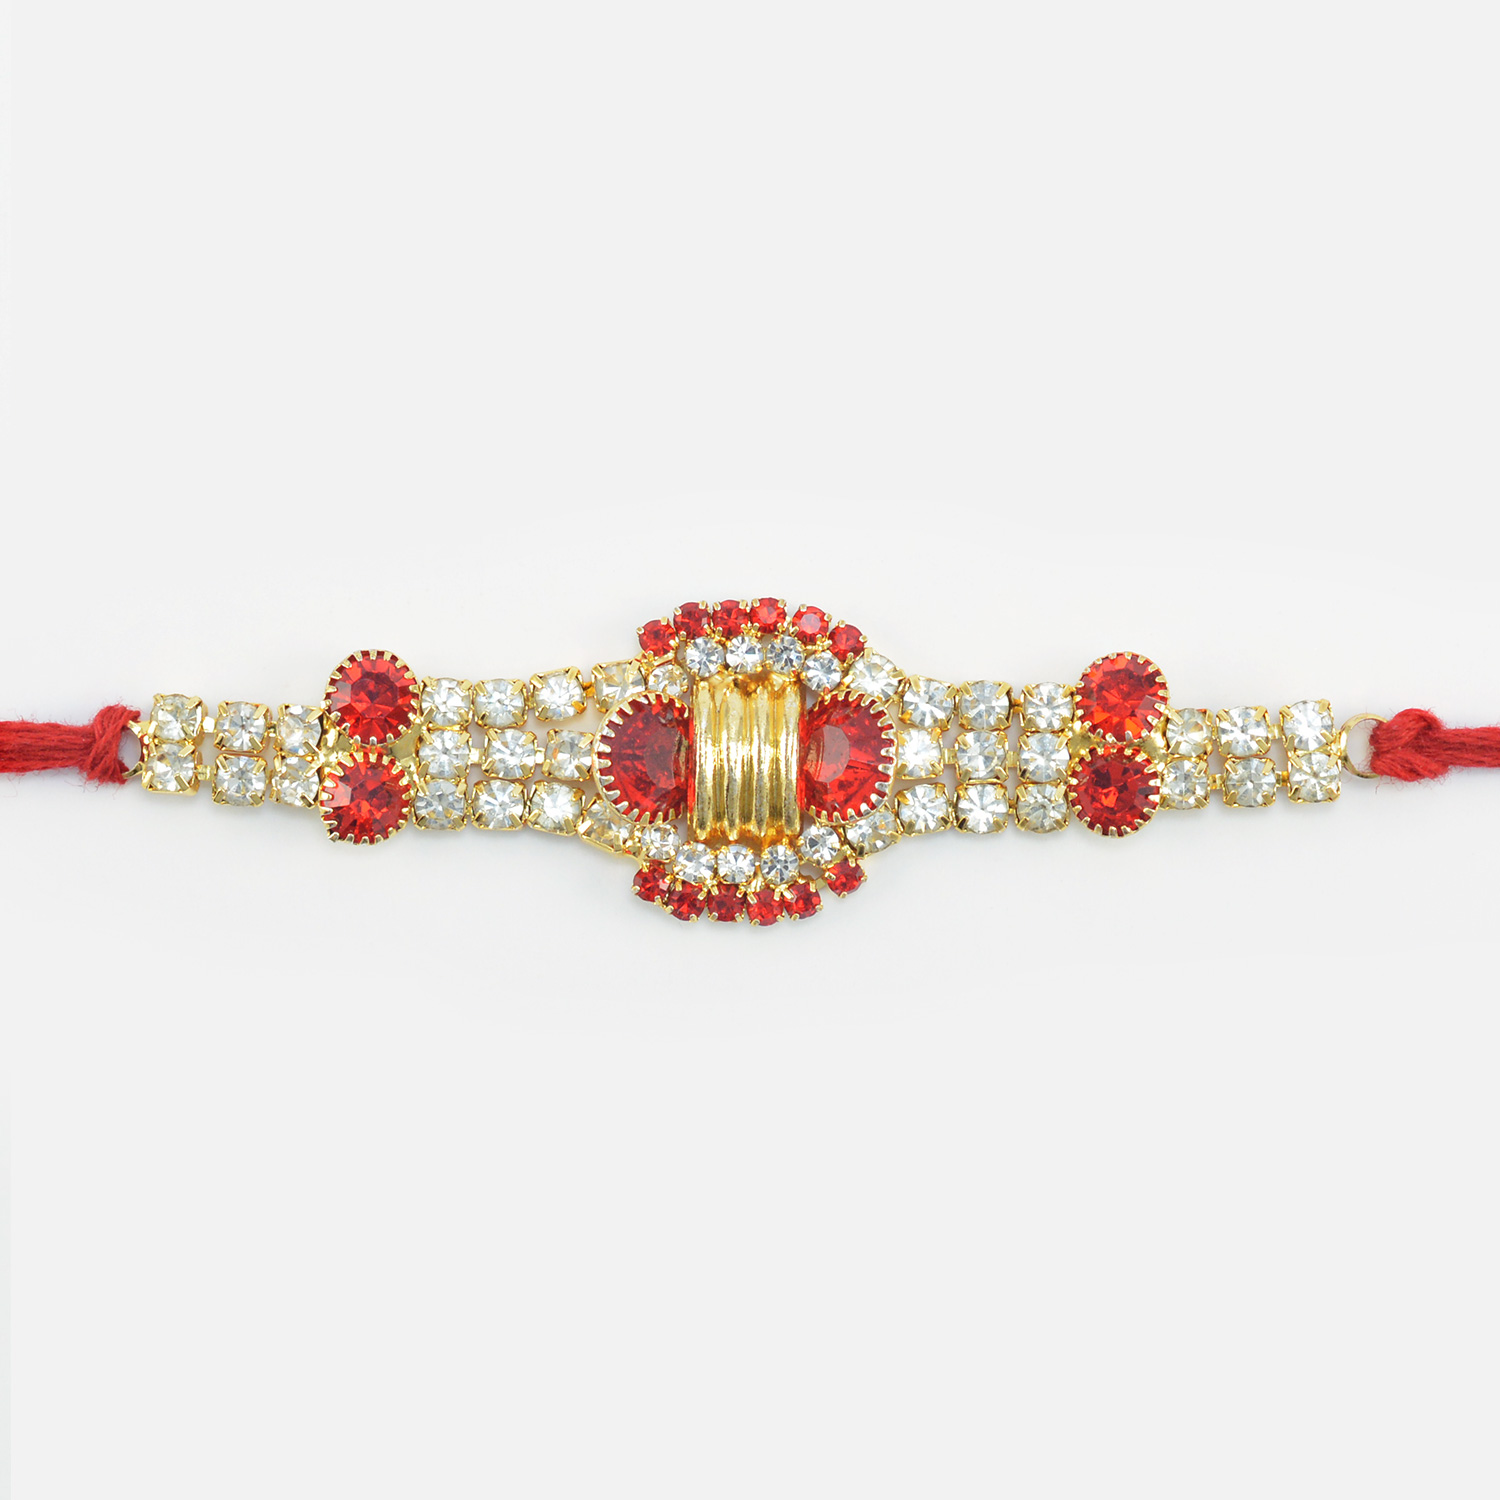 New Design er Stylish Looking Red and Silver Jewel Studded Rakhi for Brother